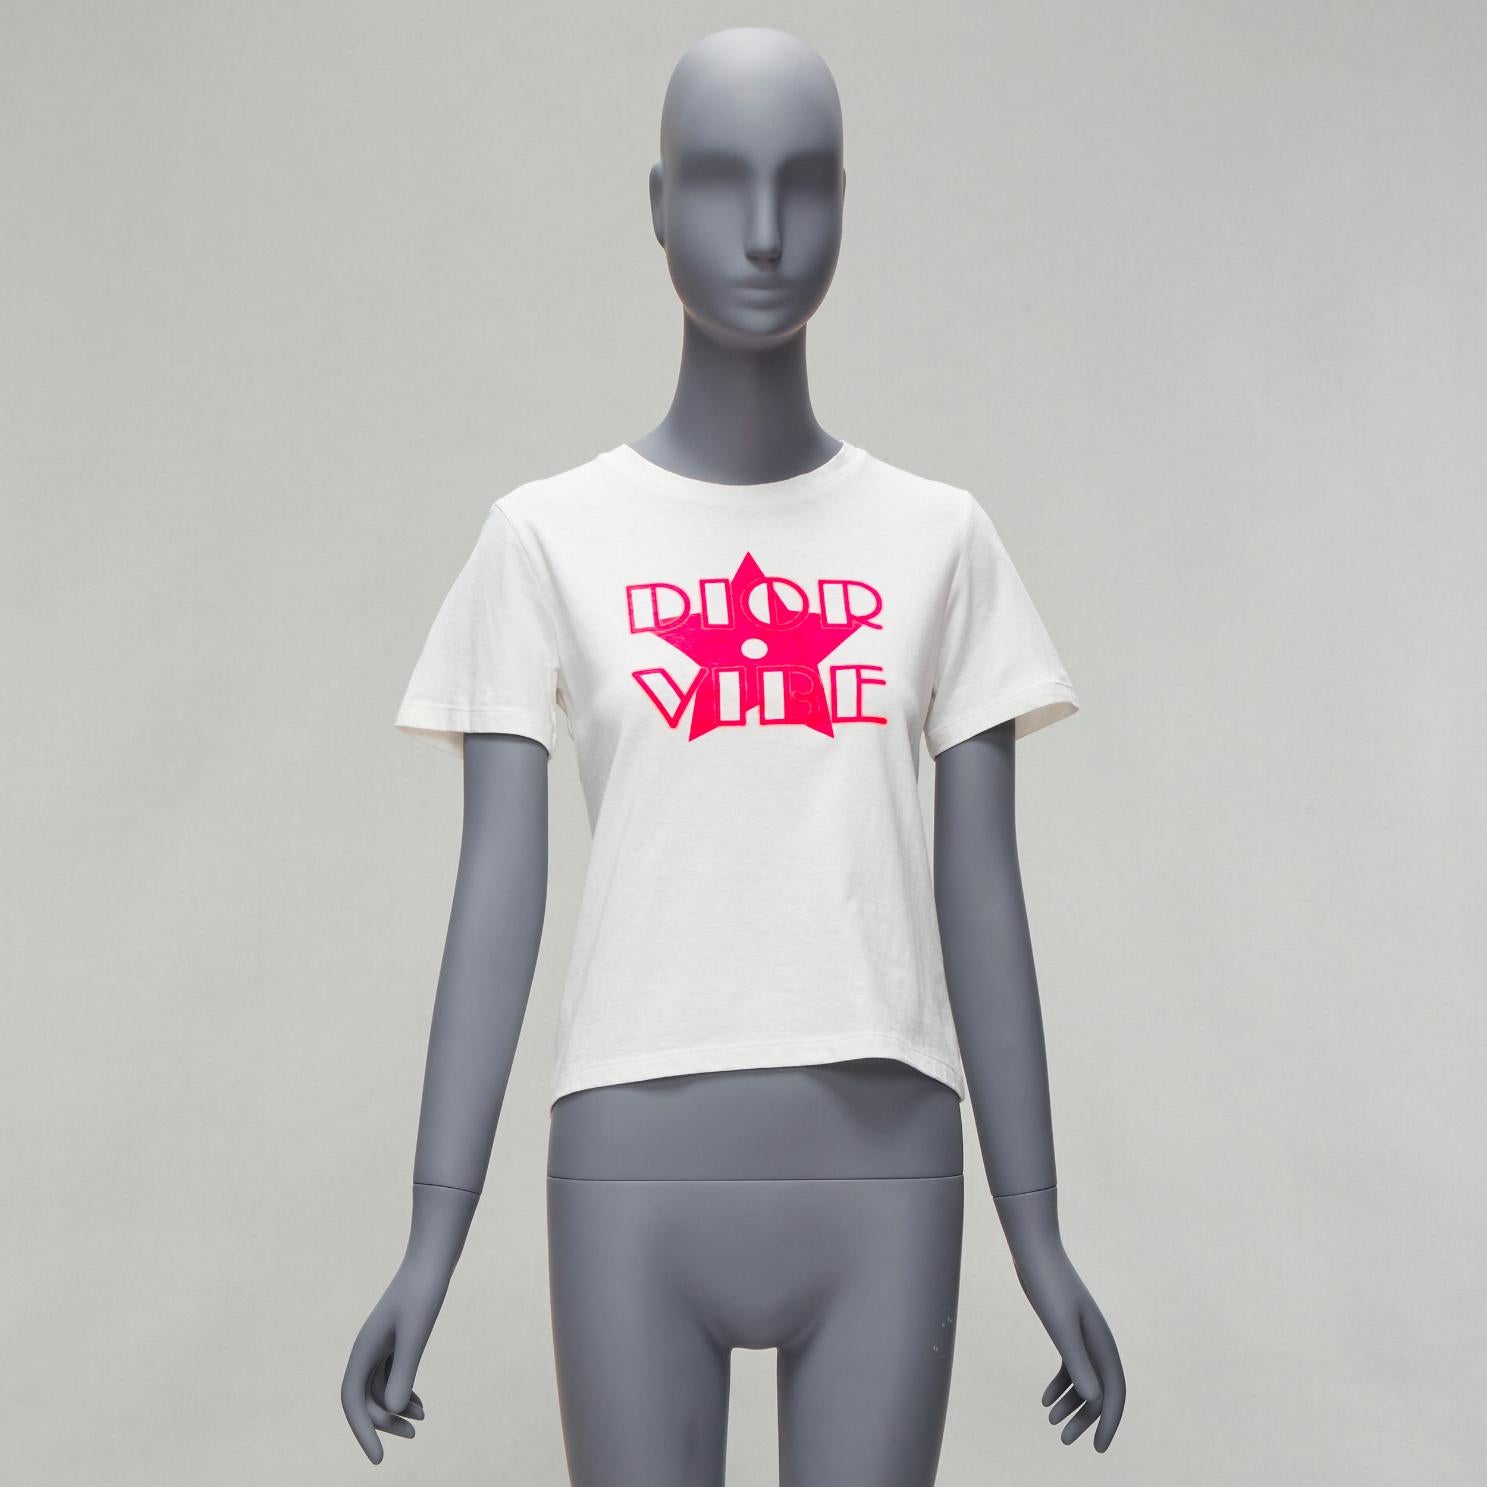 CHRISTIAN DIOR 2022 Dior Vibe neon pink star logo graphic CD bee white tshirt XS For Sale 5